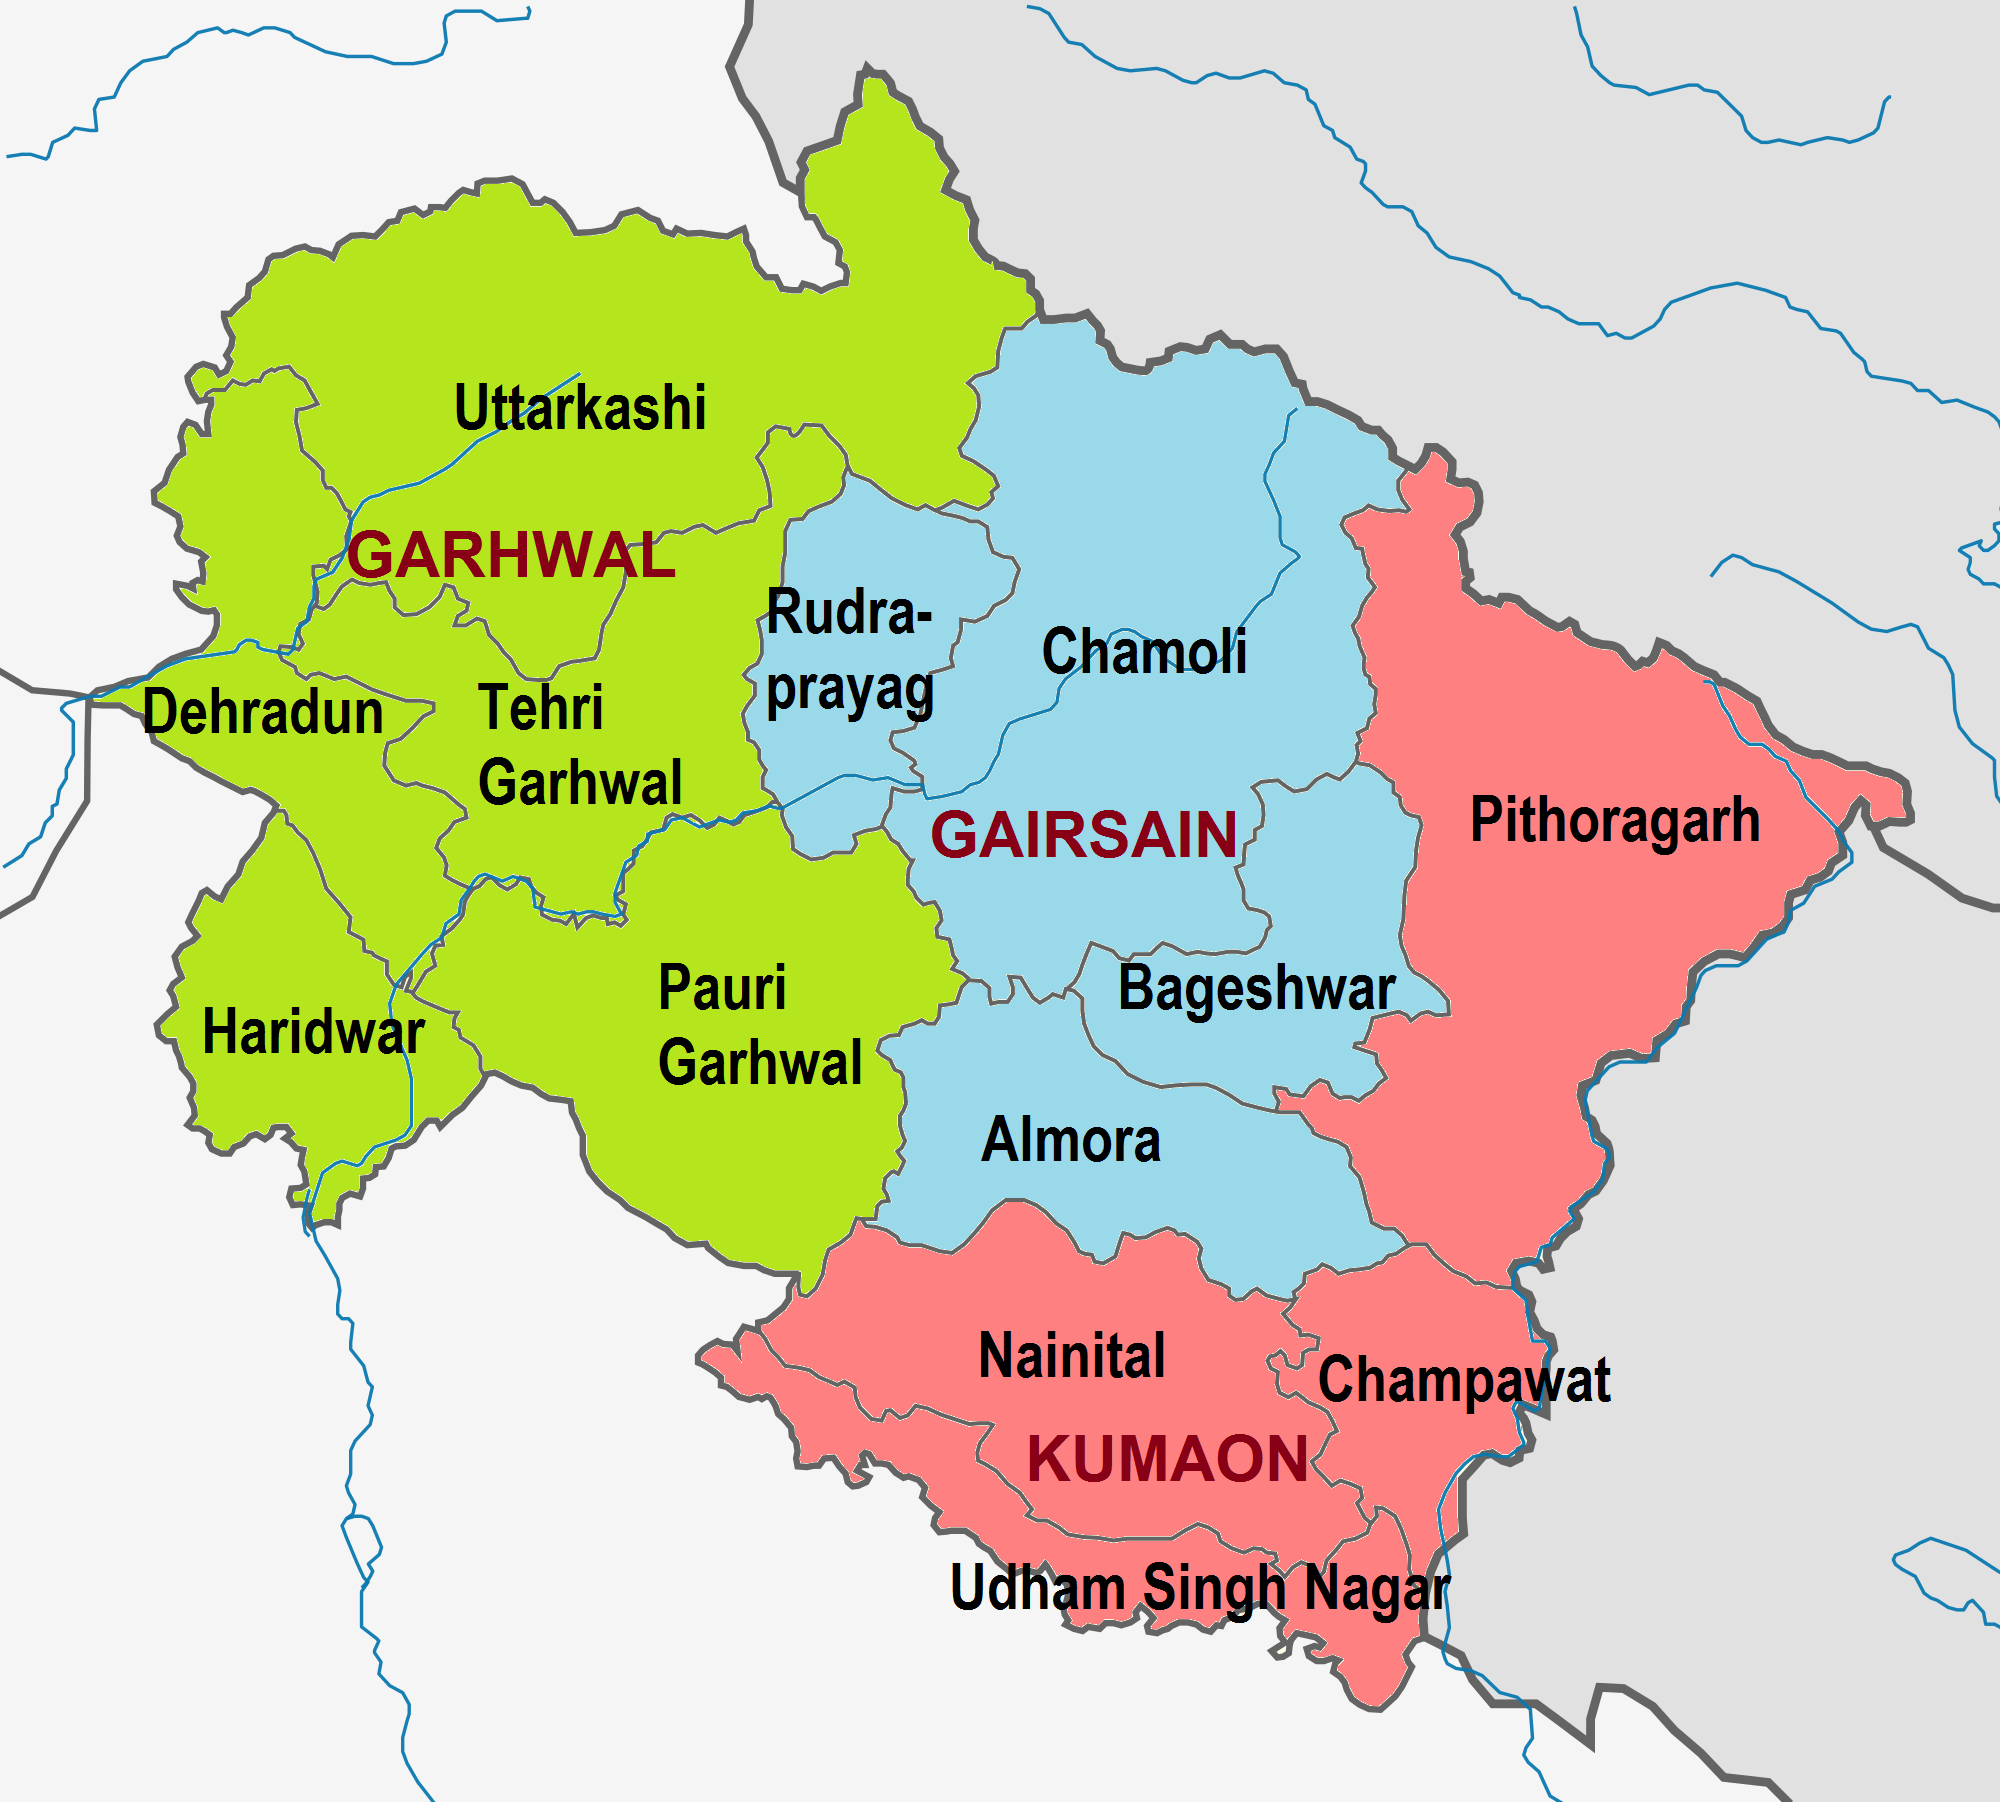 File:Uttarakhand Divisions Map.png - Wikimedia Commons